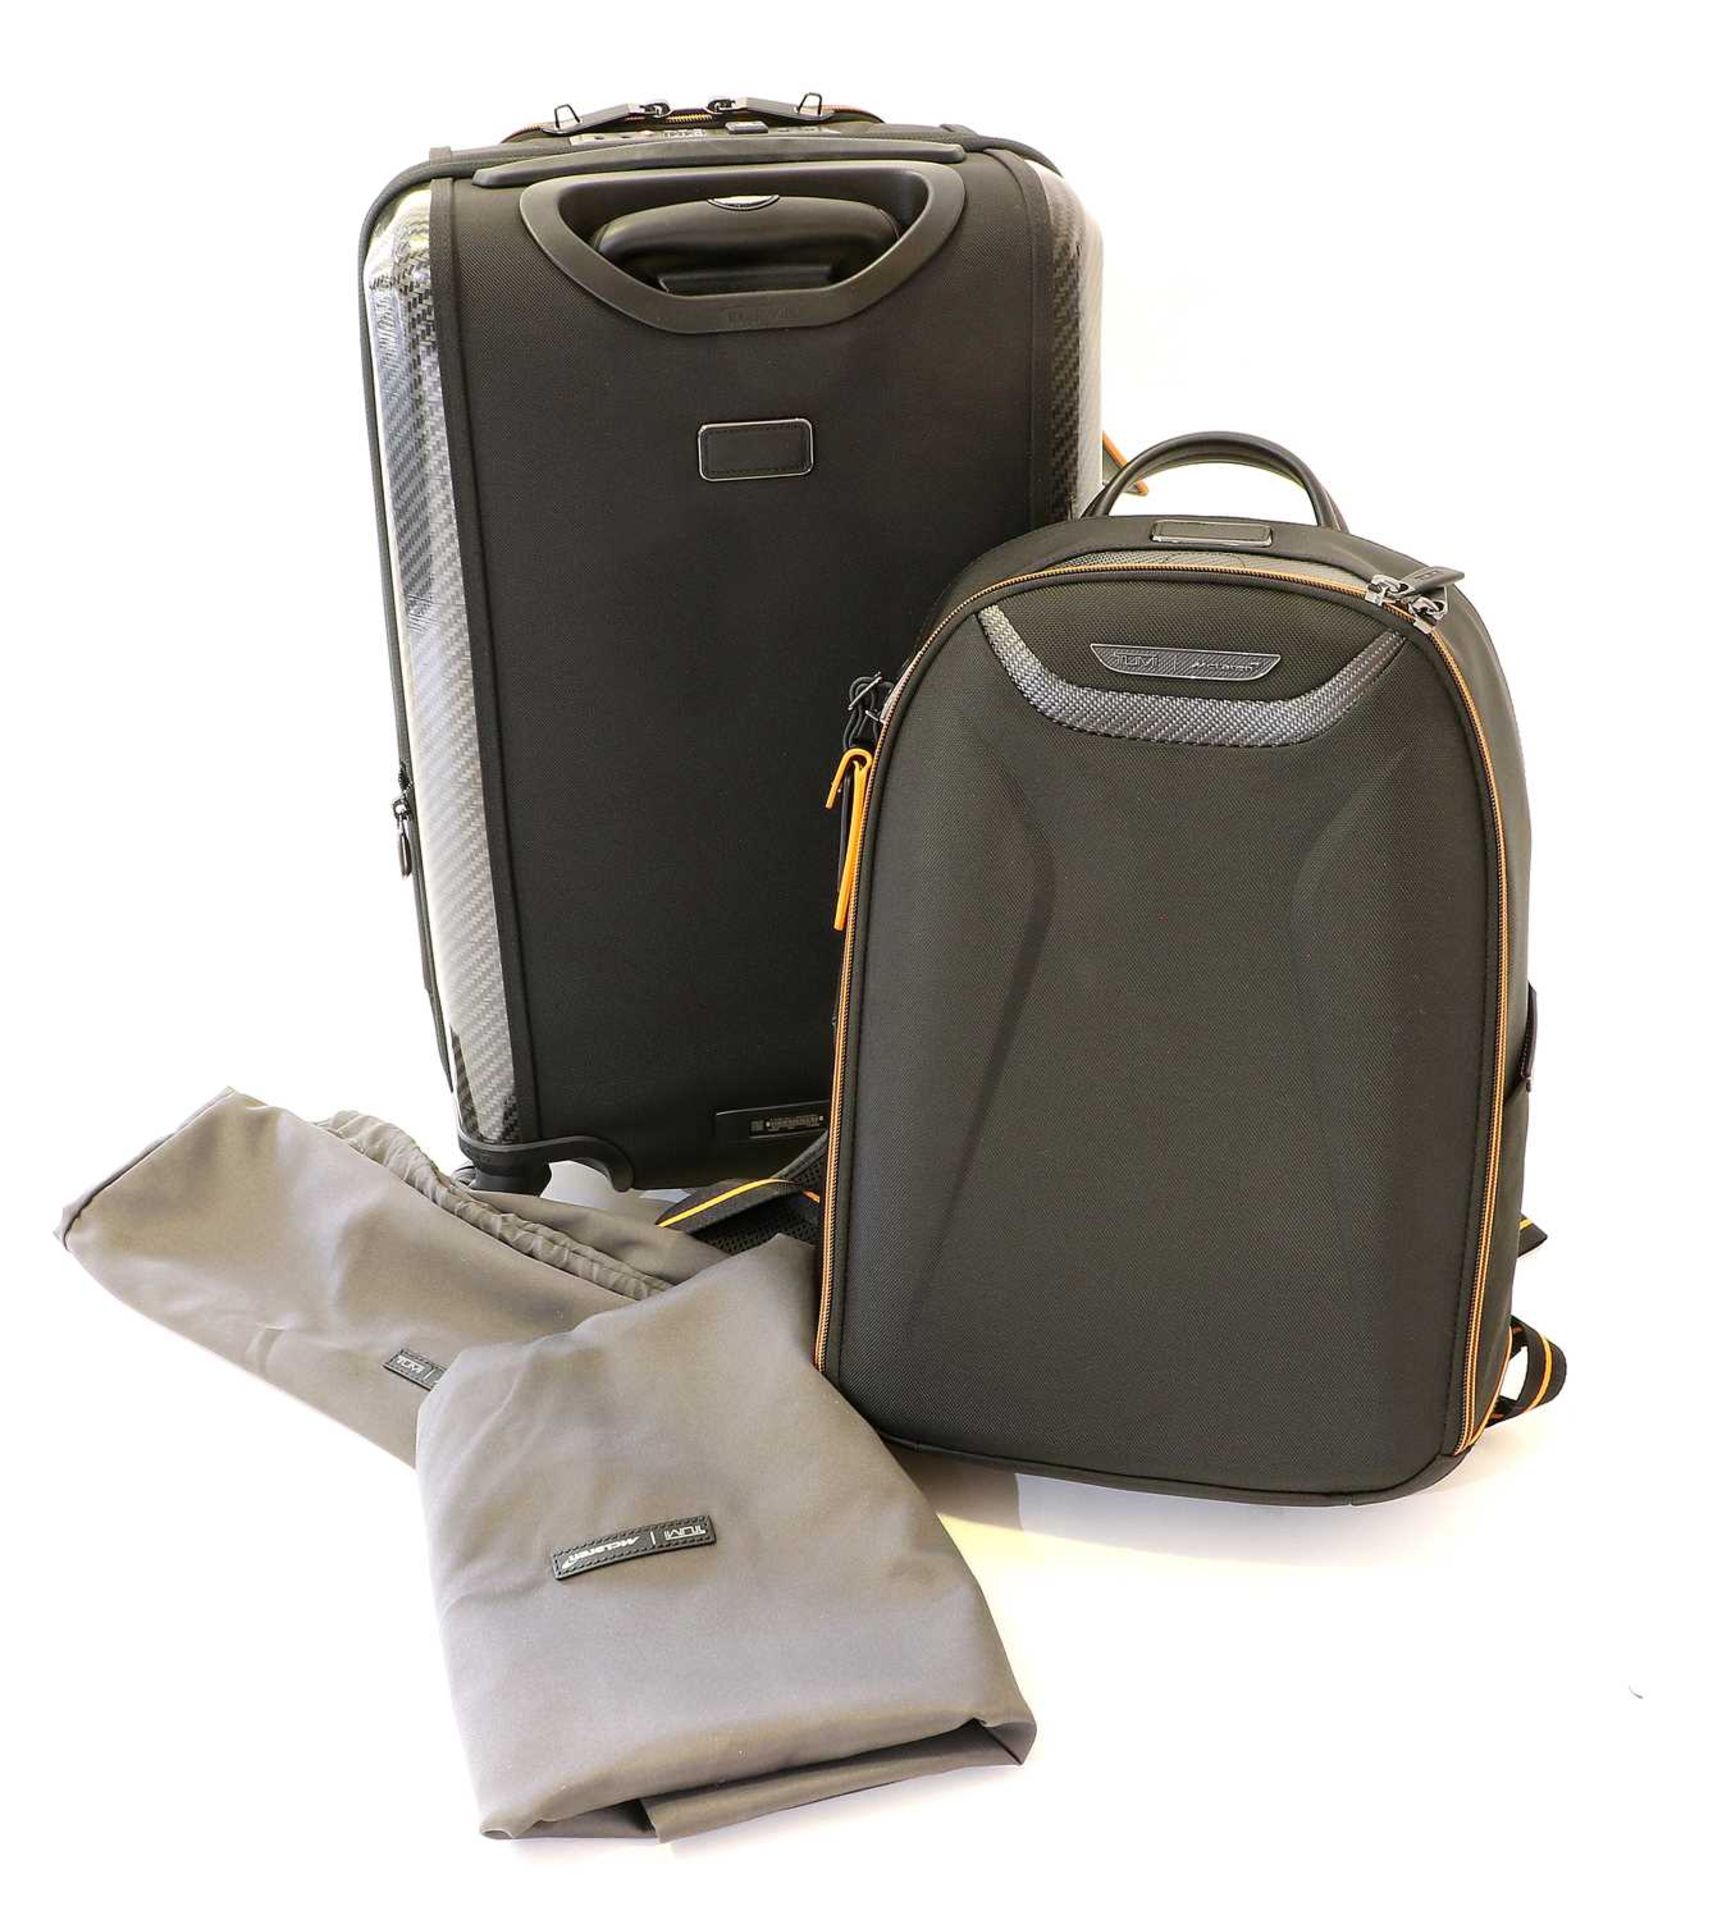 Tumi Luggage: A McLaren Suitcase, with dust cover, 55cm A Matching McLaren Velocity Backpack, with